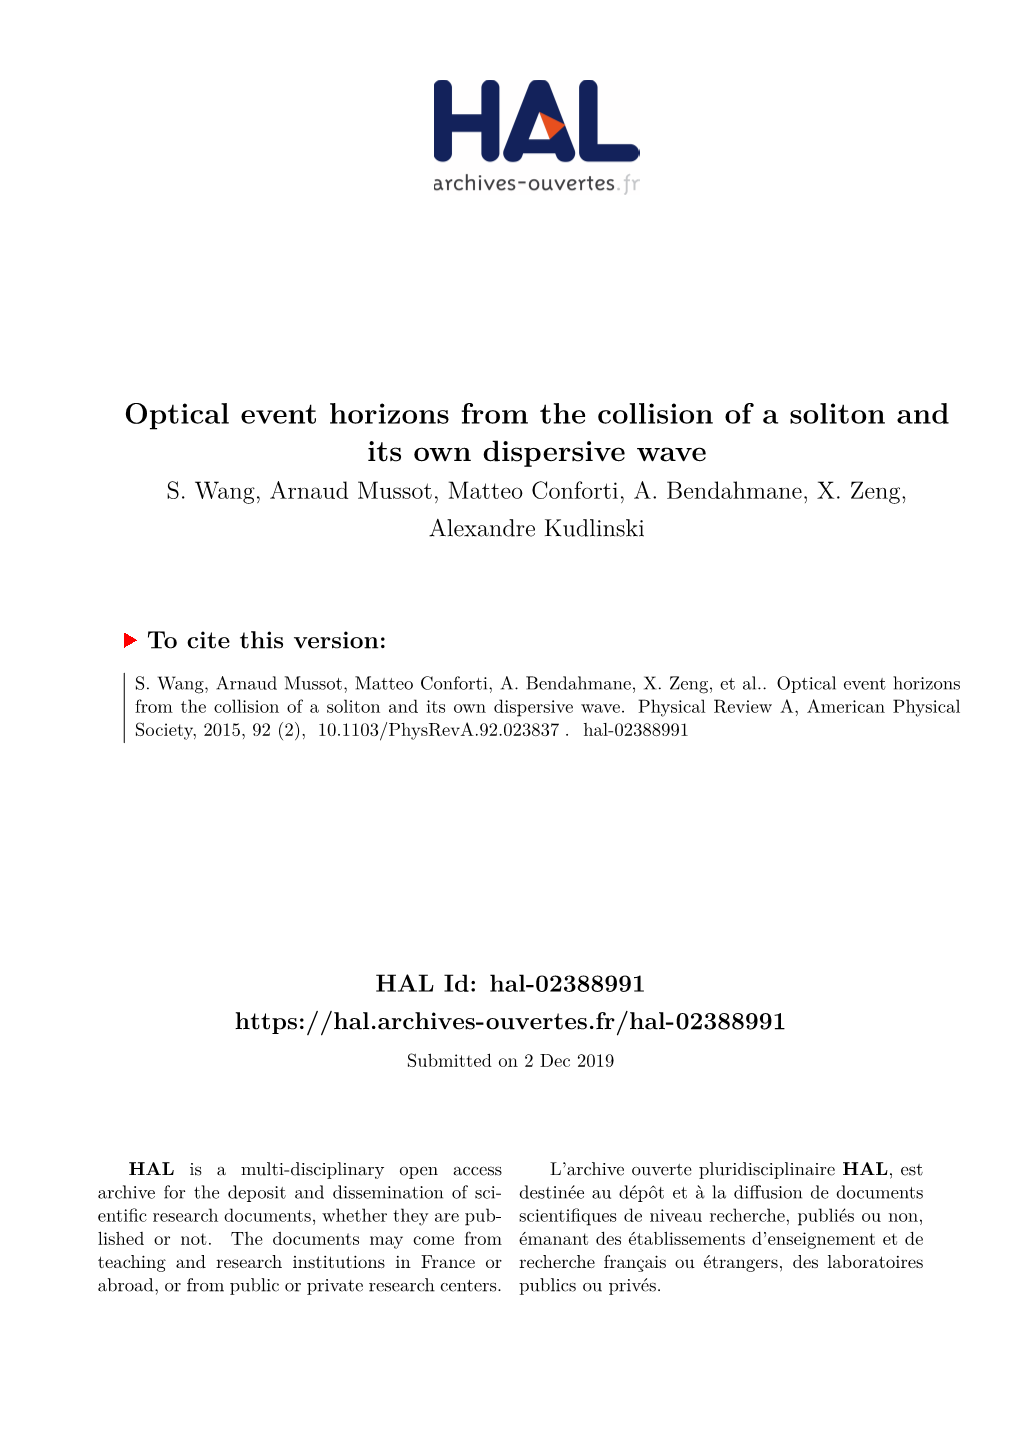 Optical Event Horizons from the Collision of a Soliton and Its Own Dispersive Wave S